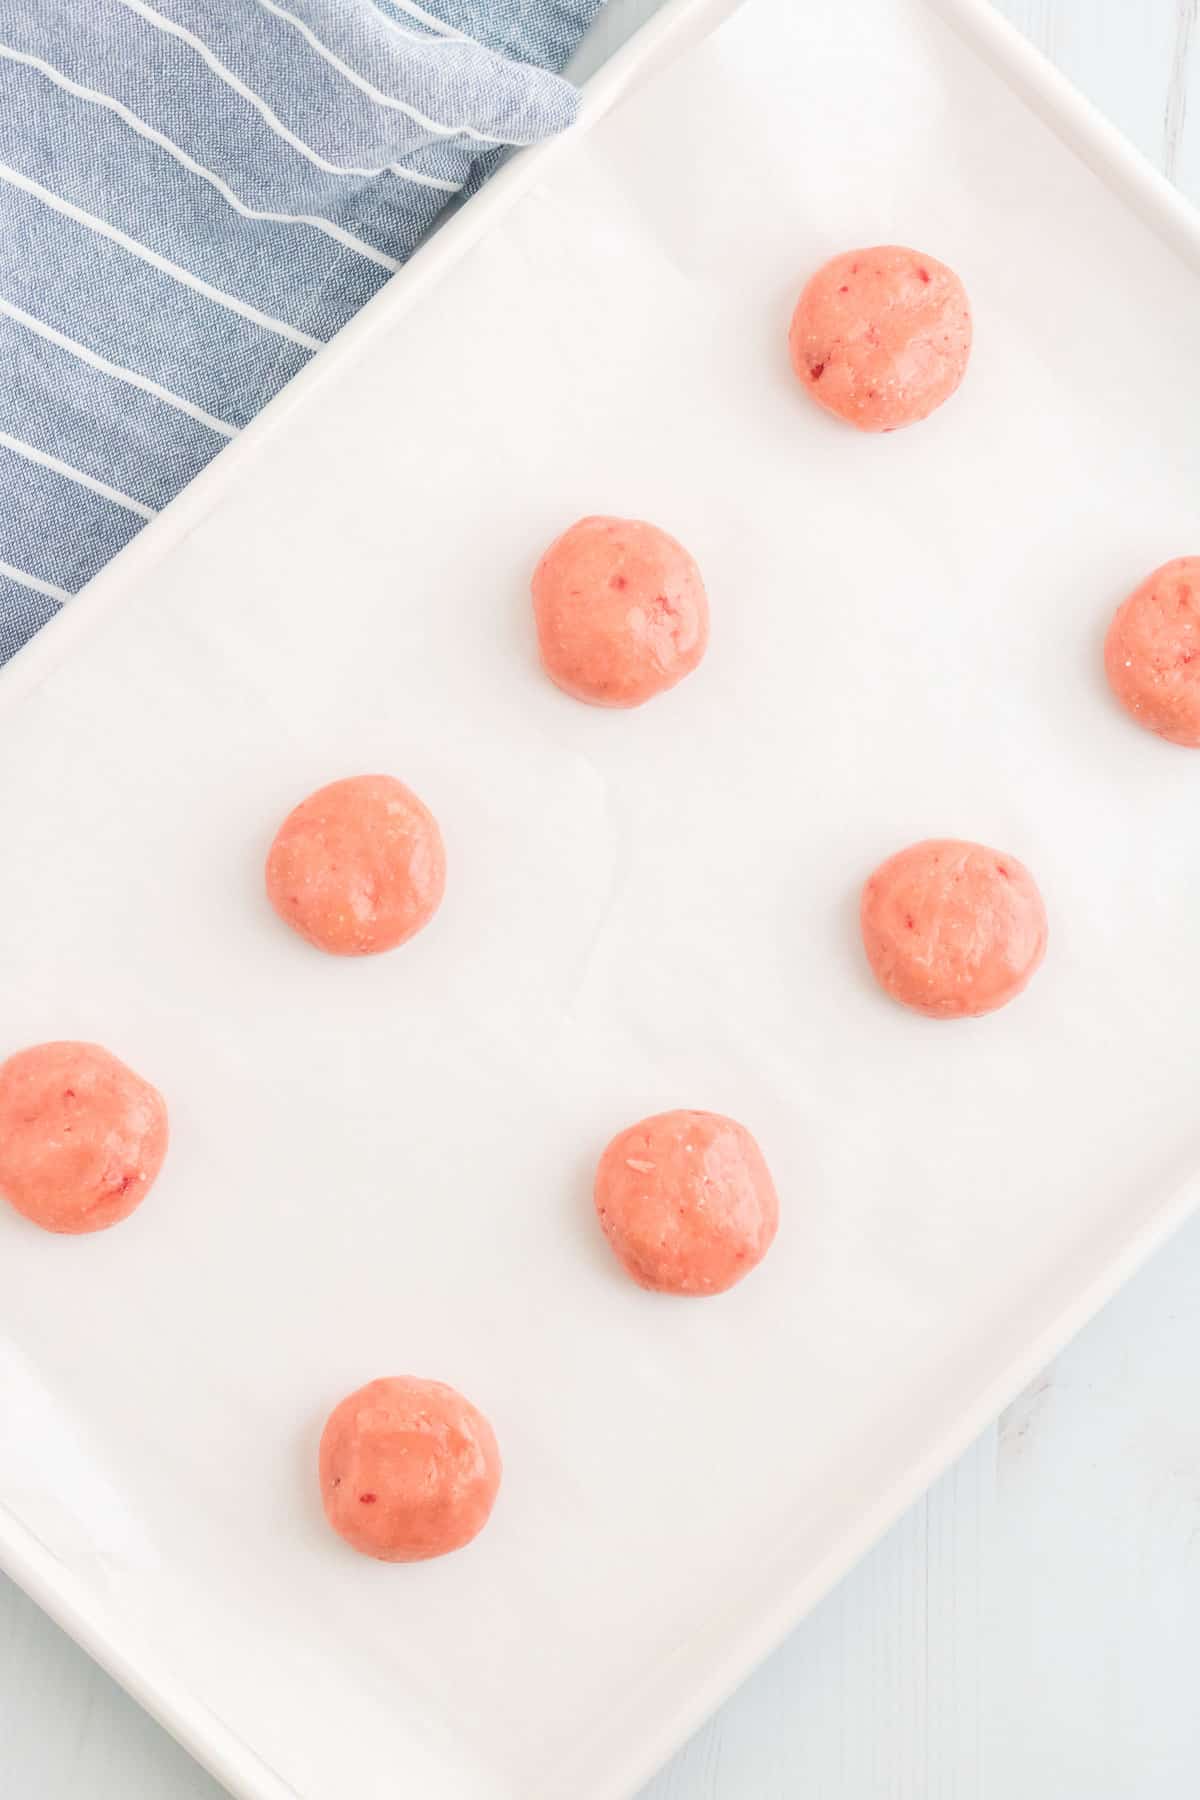 strawberry cookie dough balls on a cookie sheet.